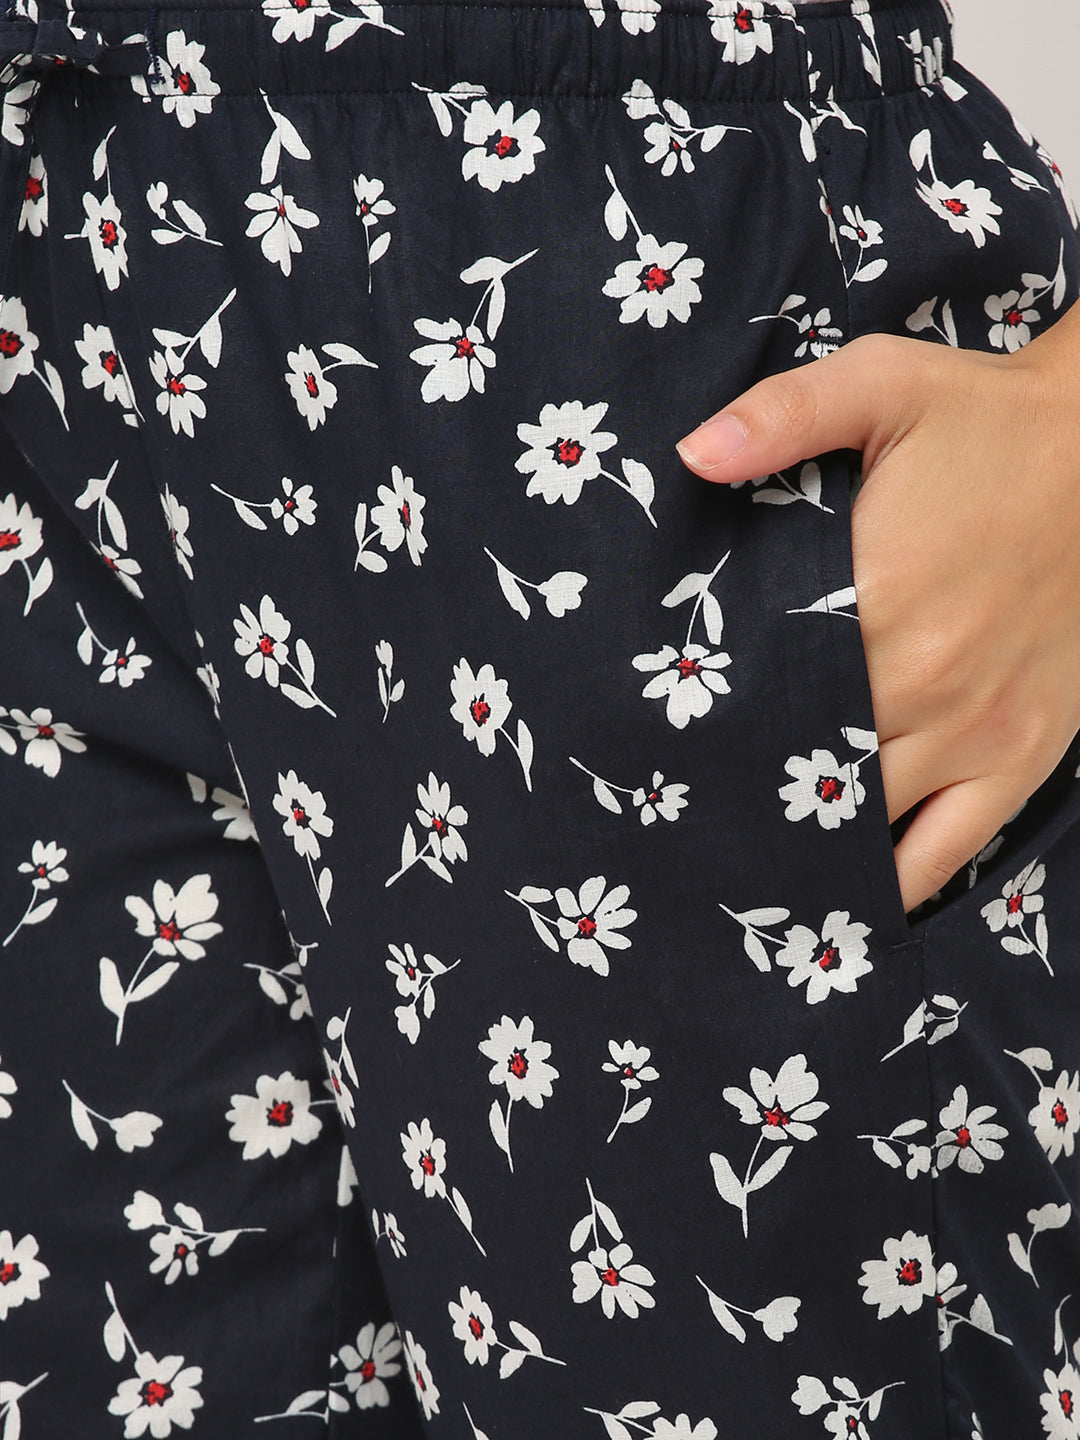 Women's Floral Print, Black, Cotton, Regular Fit, Elasticated, Waistband, Pyjama  With Side Pockets